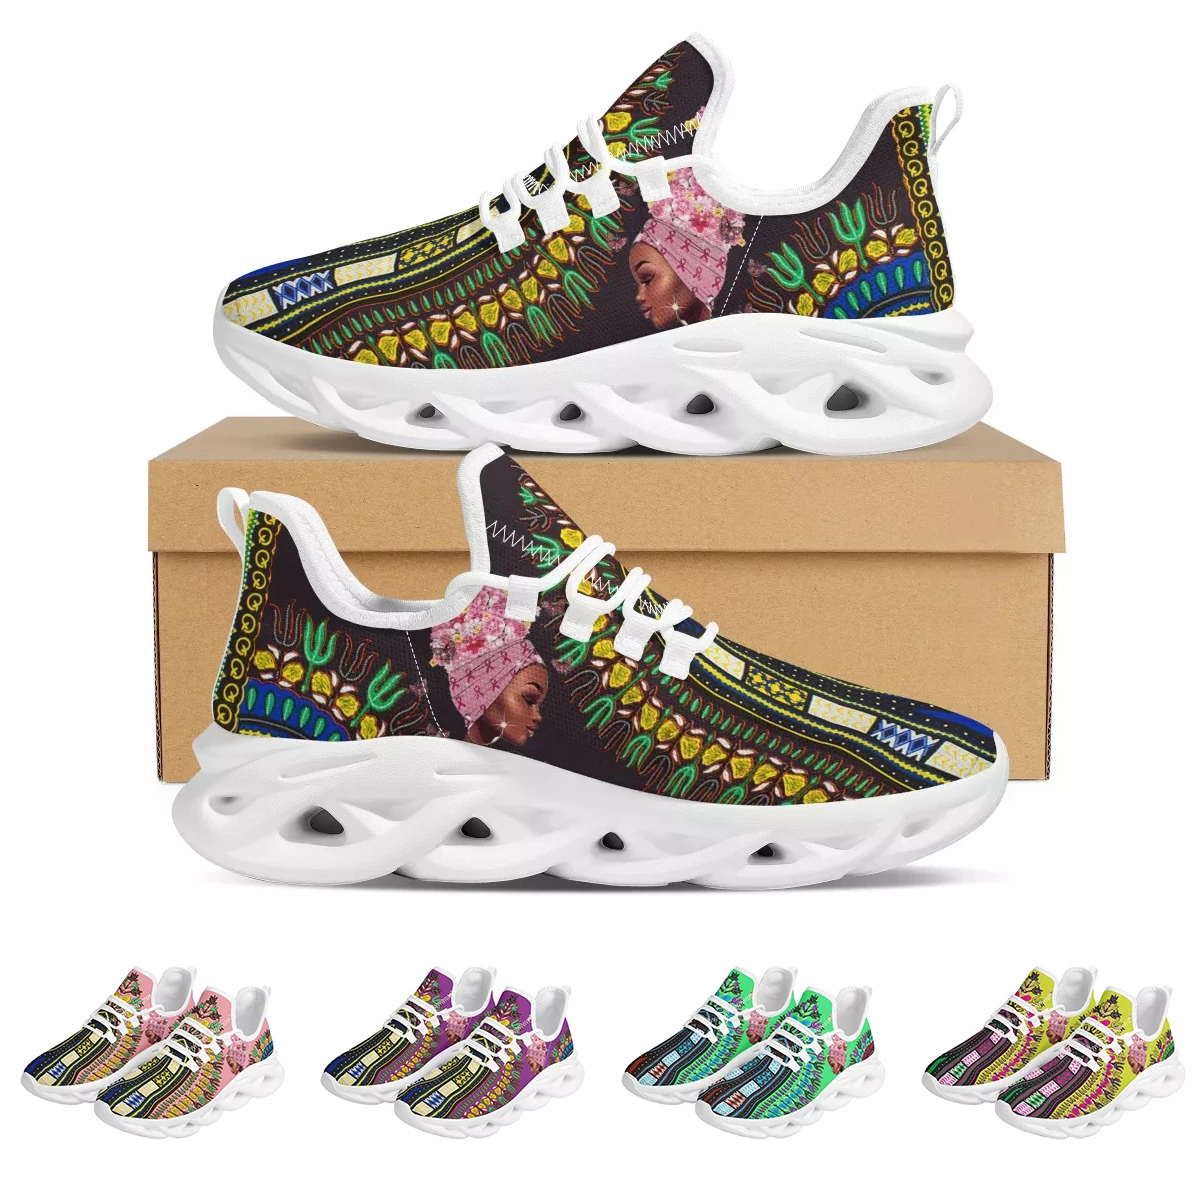 

Nopersonality New Print Women's Shoes Lightweight Breathable Medical Sneakers Girls Personality Graffiti Comfortable Flat Shoes